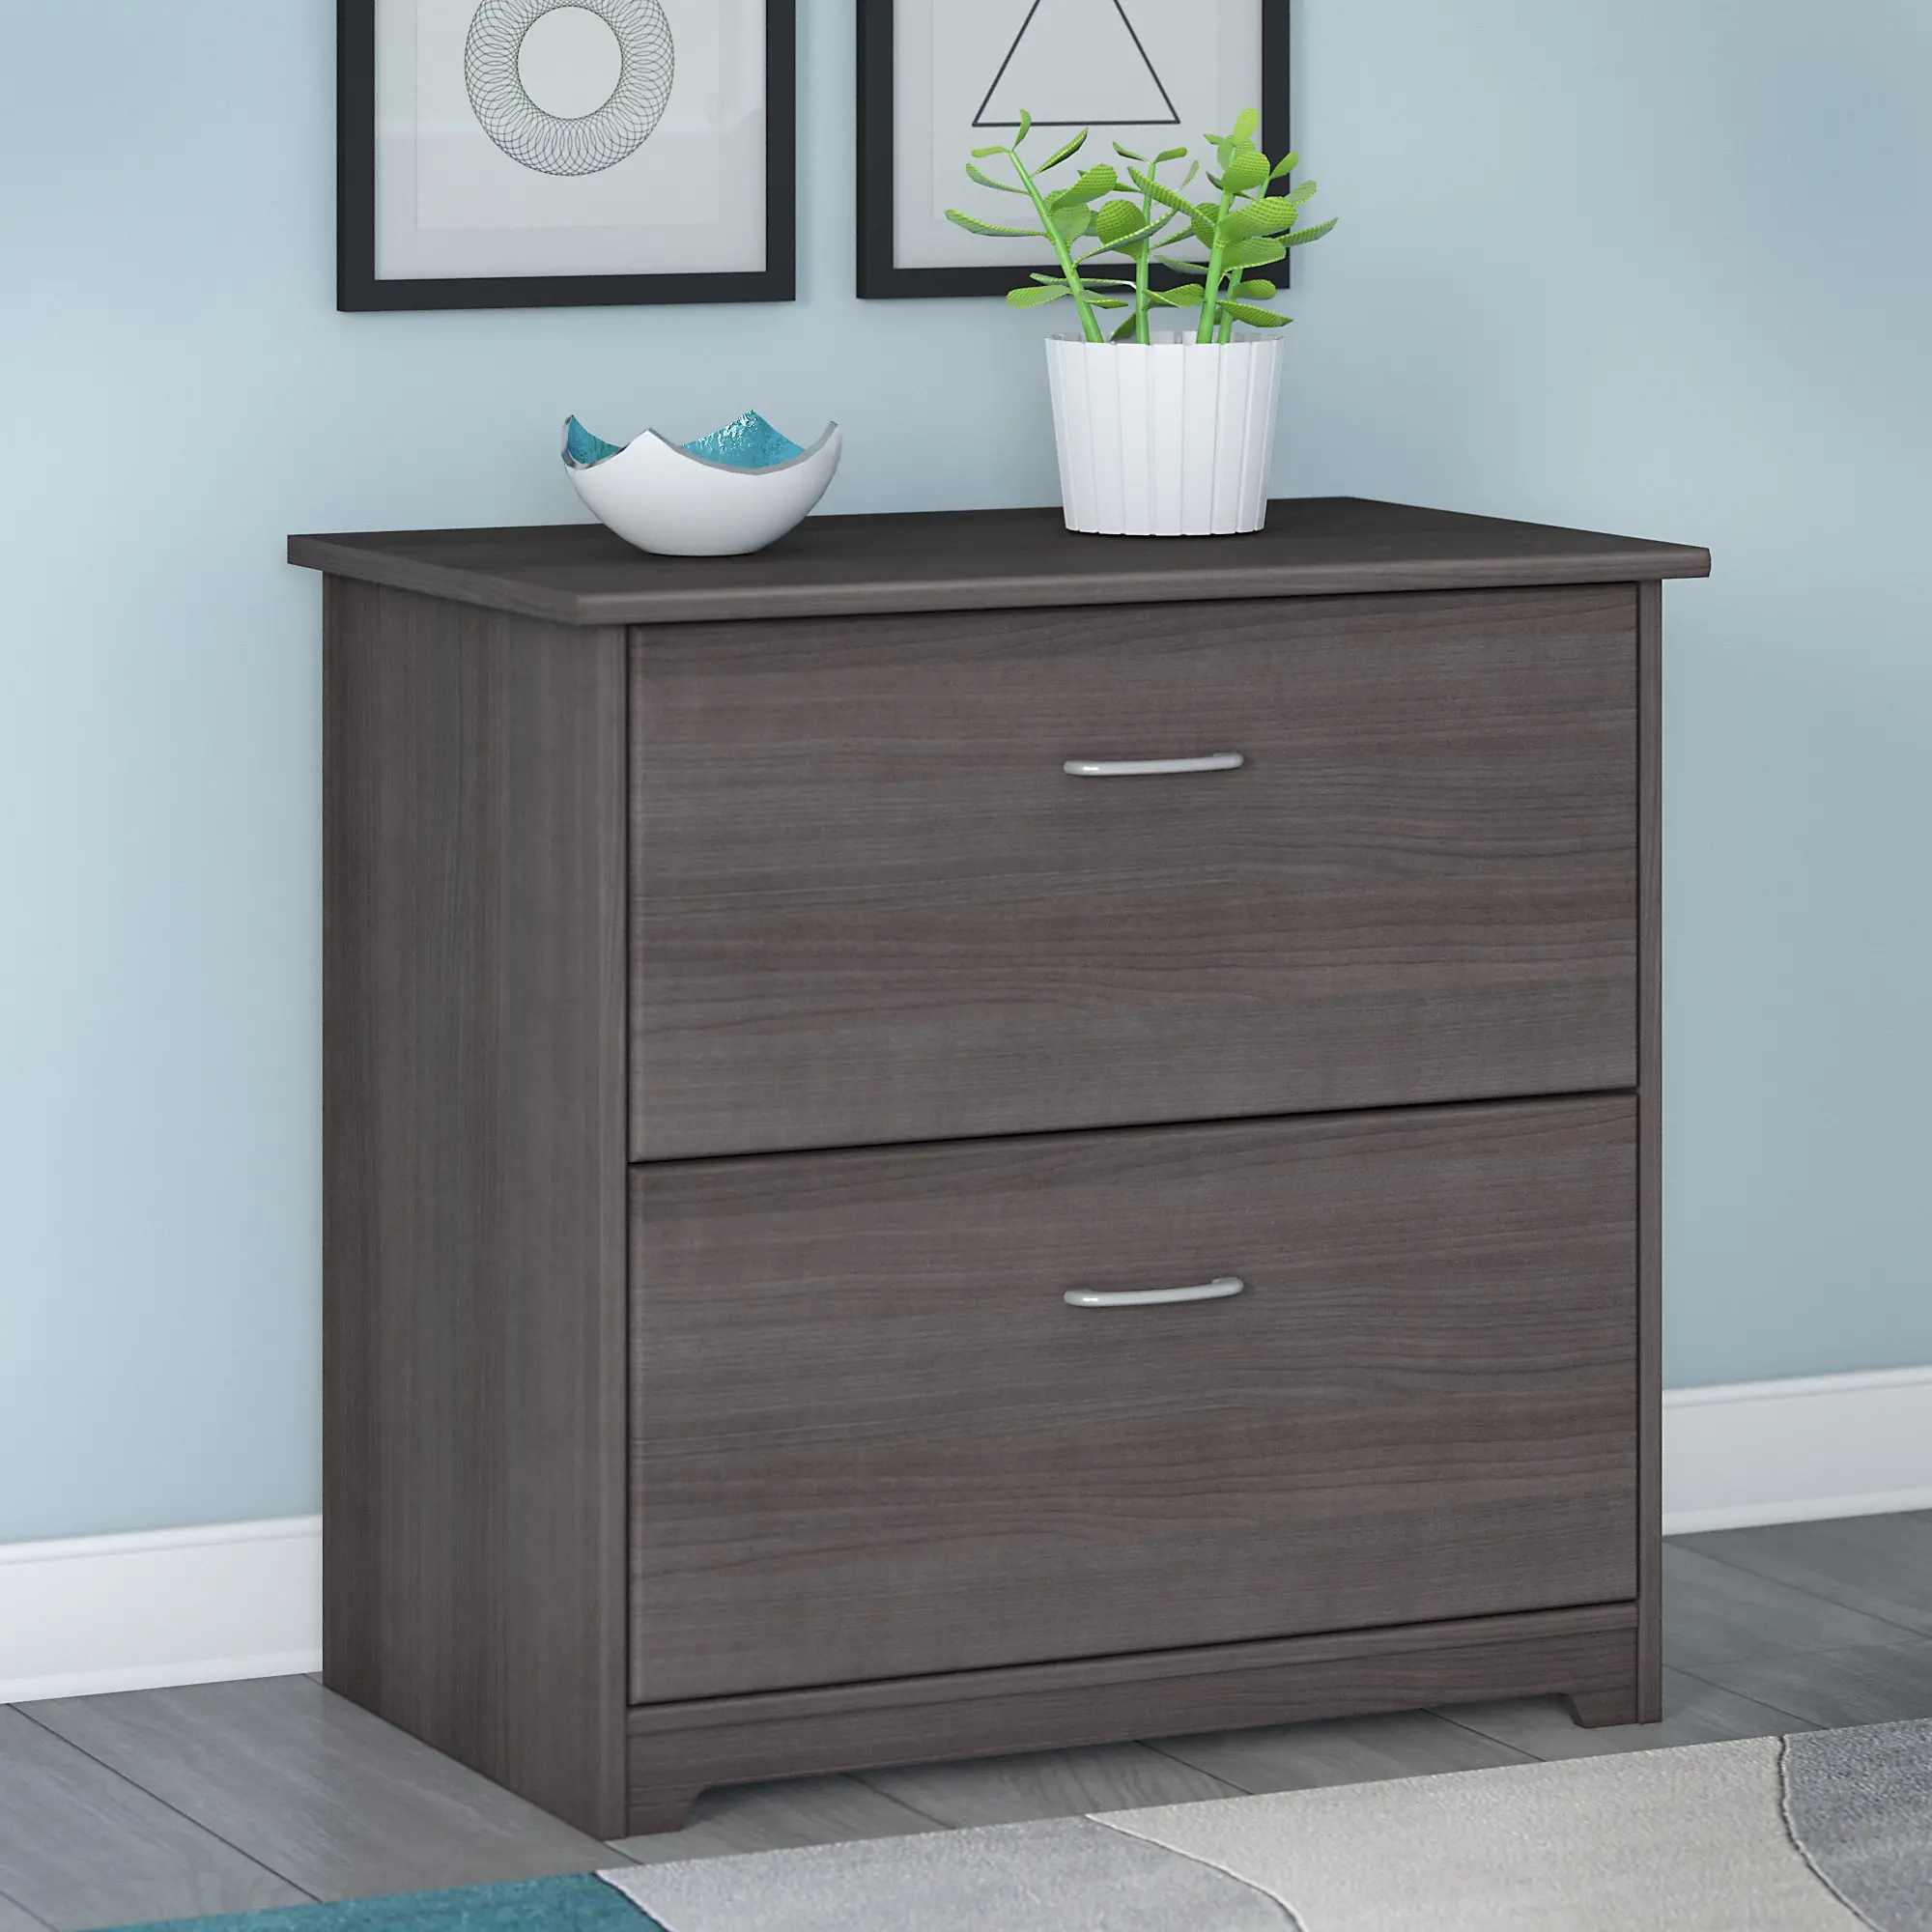 WC31780 Cabot Heather Gray 2 Drawer Lateral File Cabinet - sku WC31780